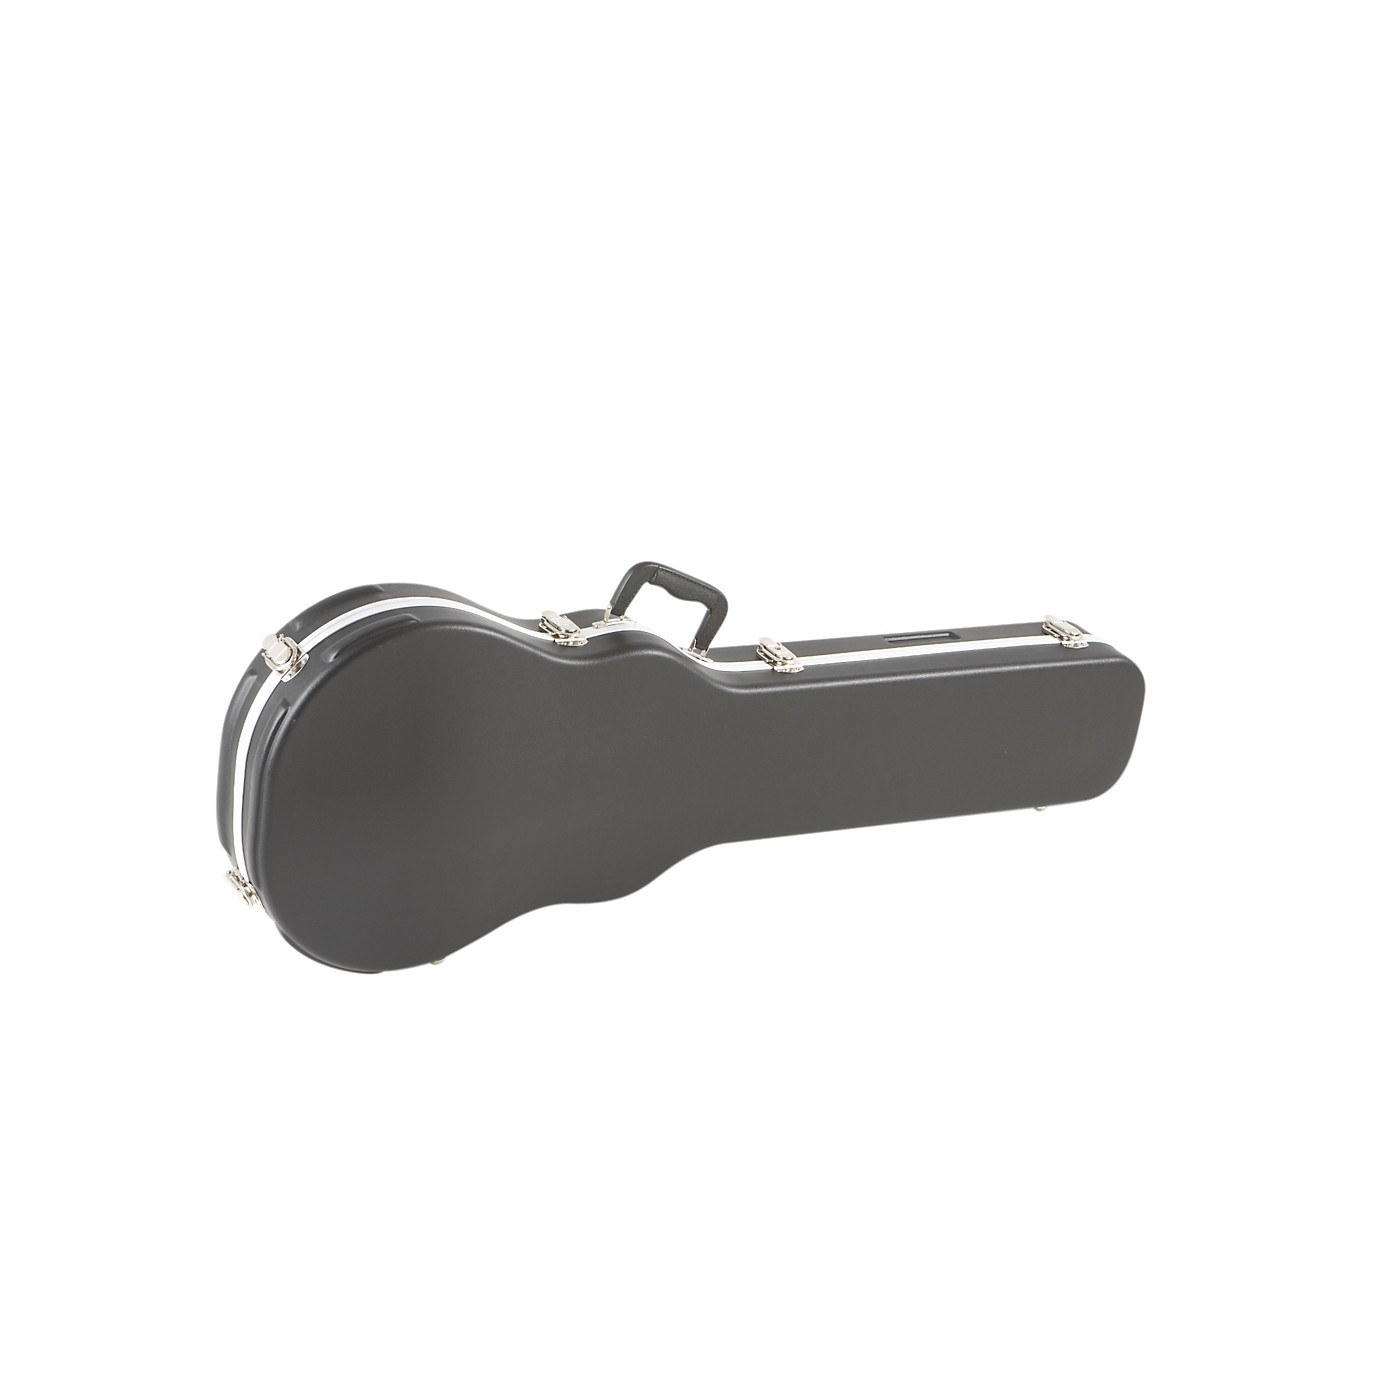 Musician's Gear MGMELP Molded ABS Electric Guitar Case thumbnail